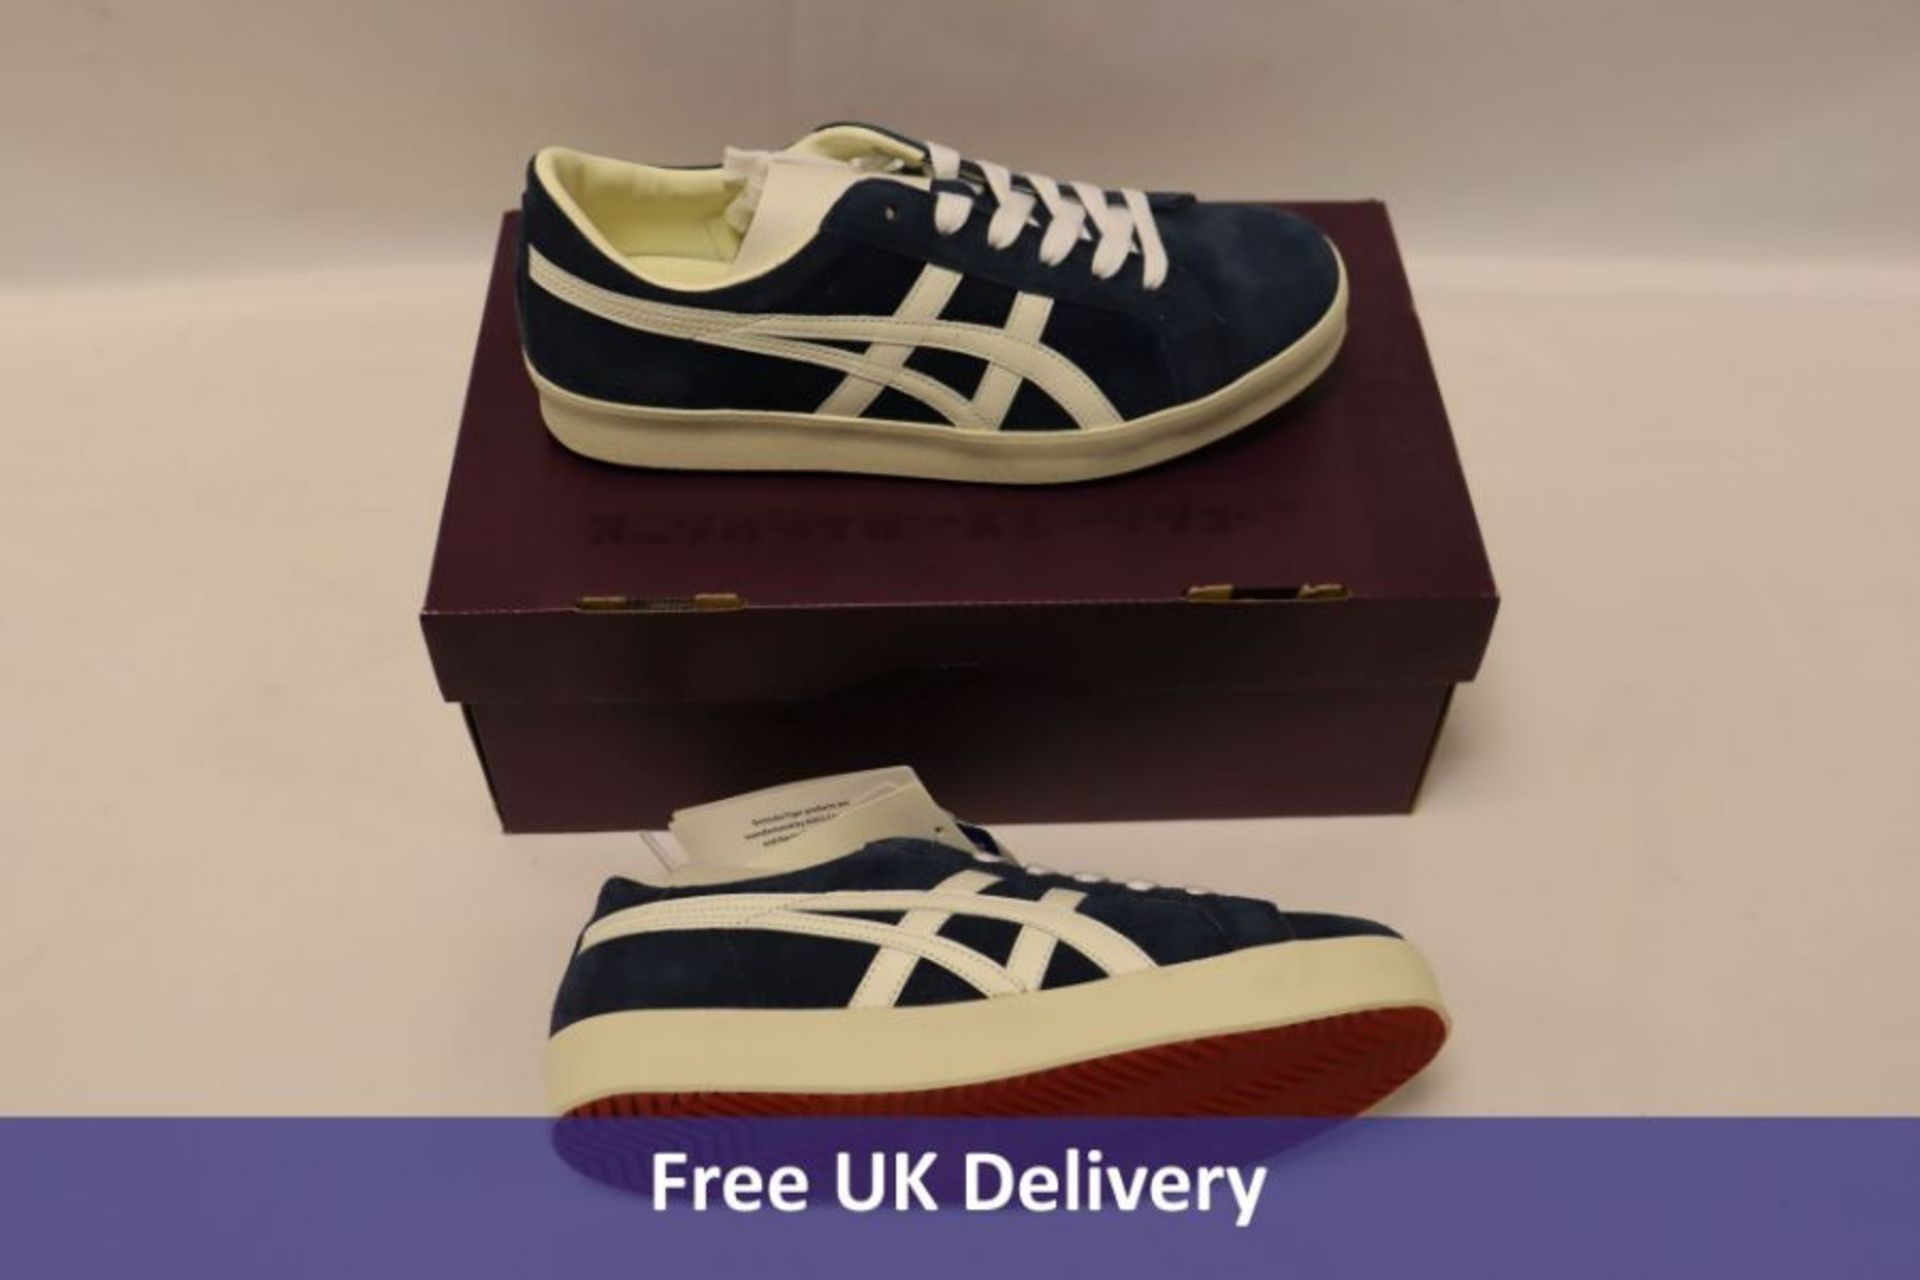 Onitsuka Tiger Fabre NM Unisex Trainers, Navy/White, UK 4.5